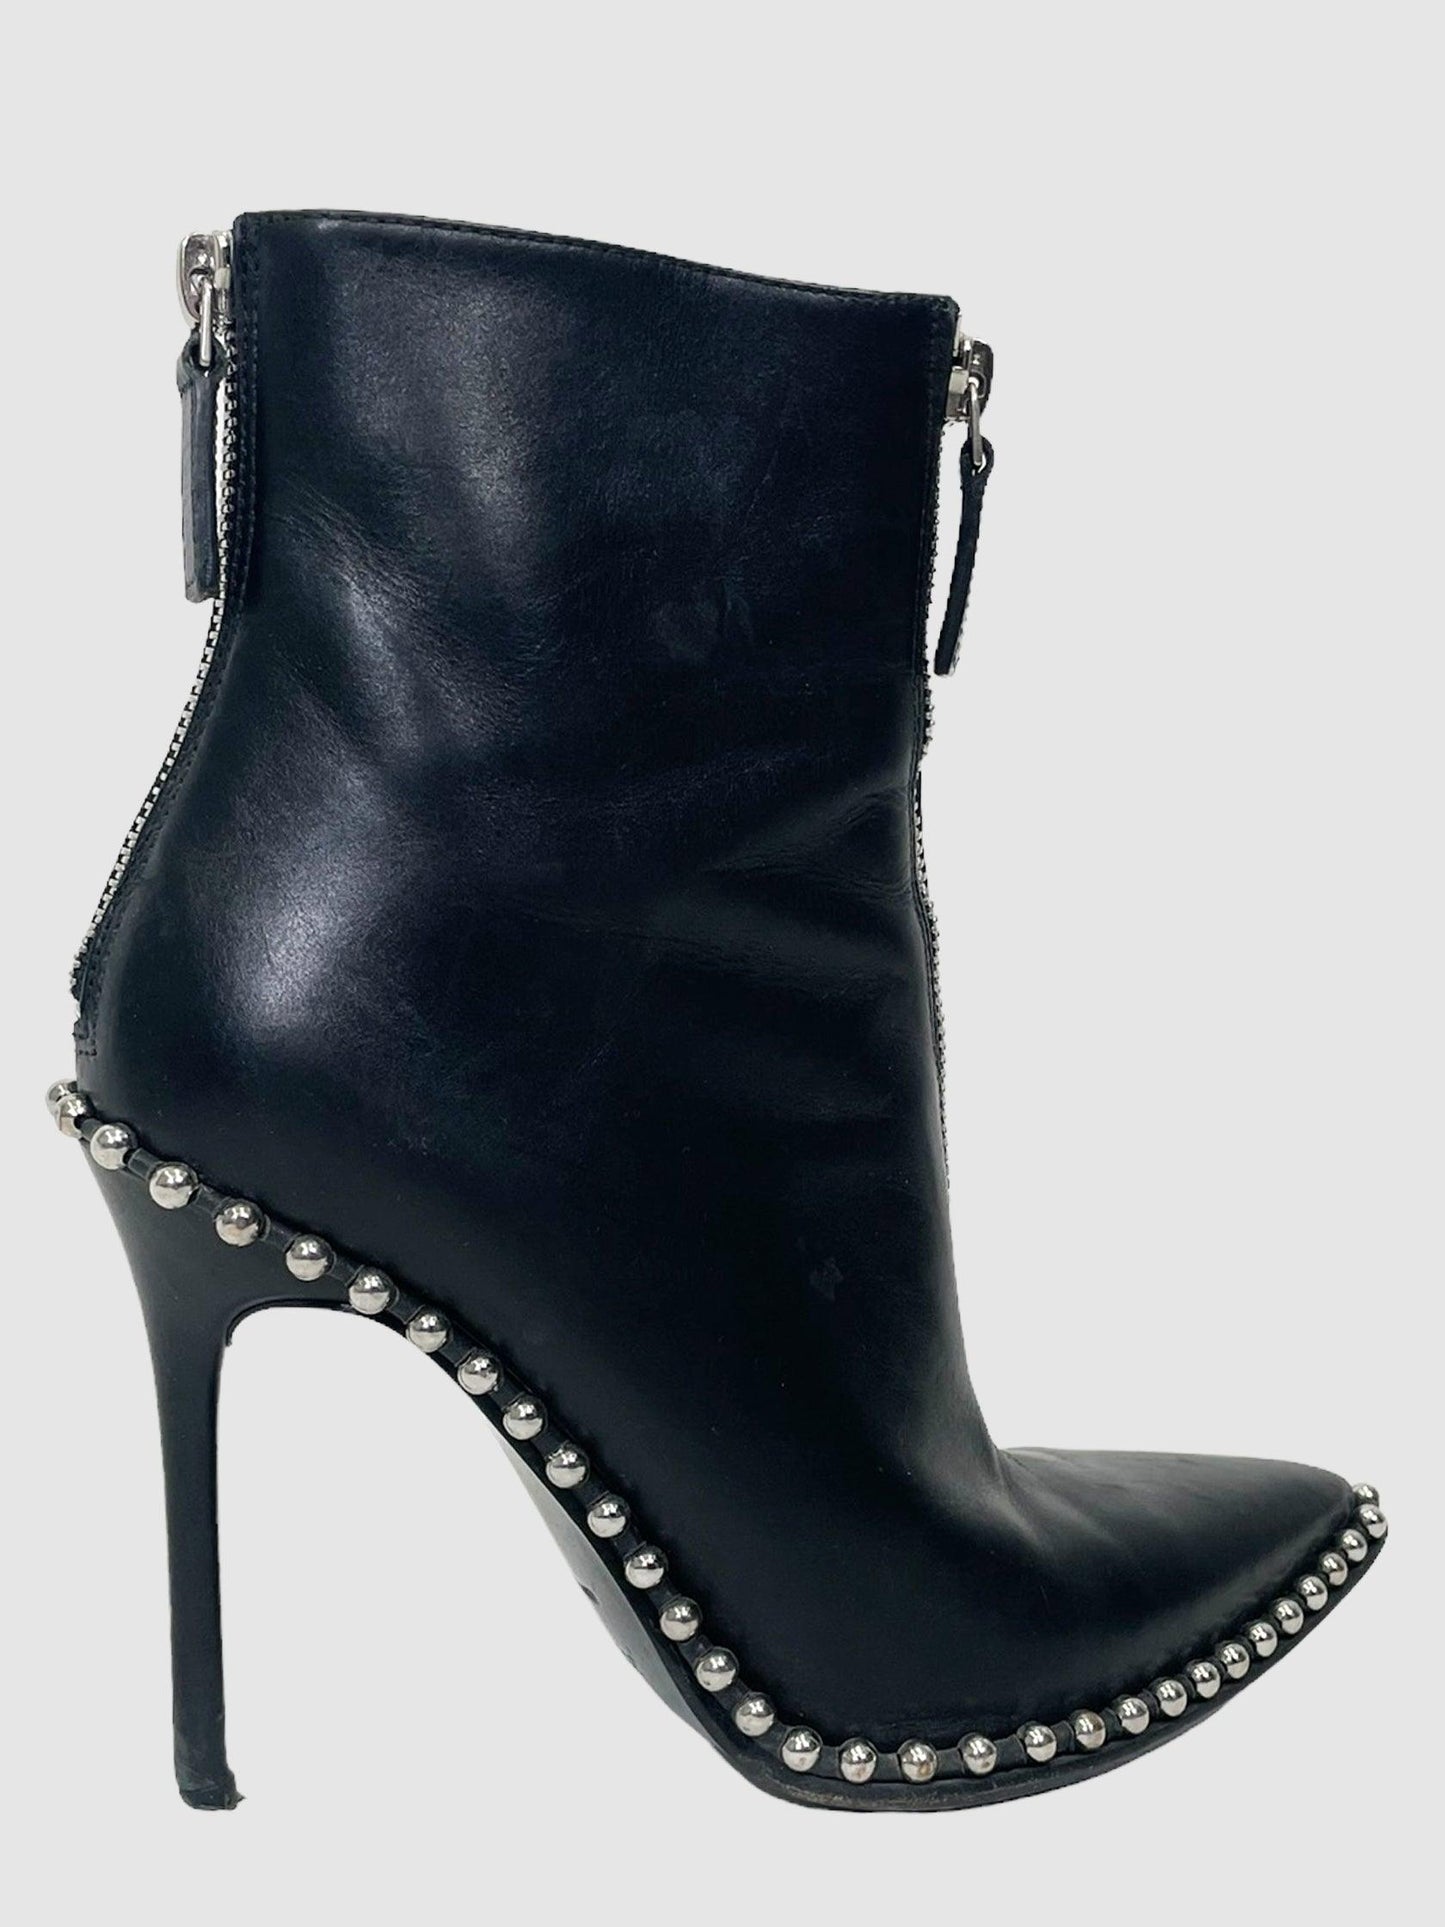 Alexander Wang Studded Black Heel Boots - Size 35 1/2 - Second Nature Boutique